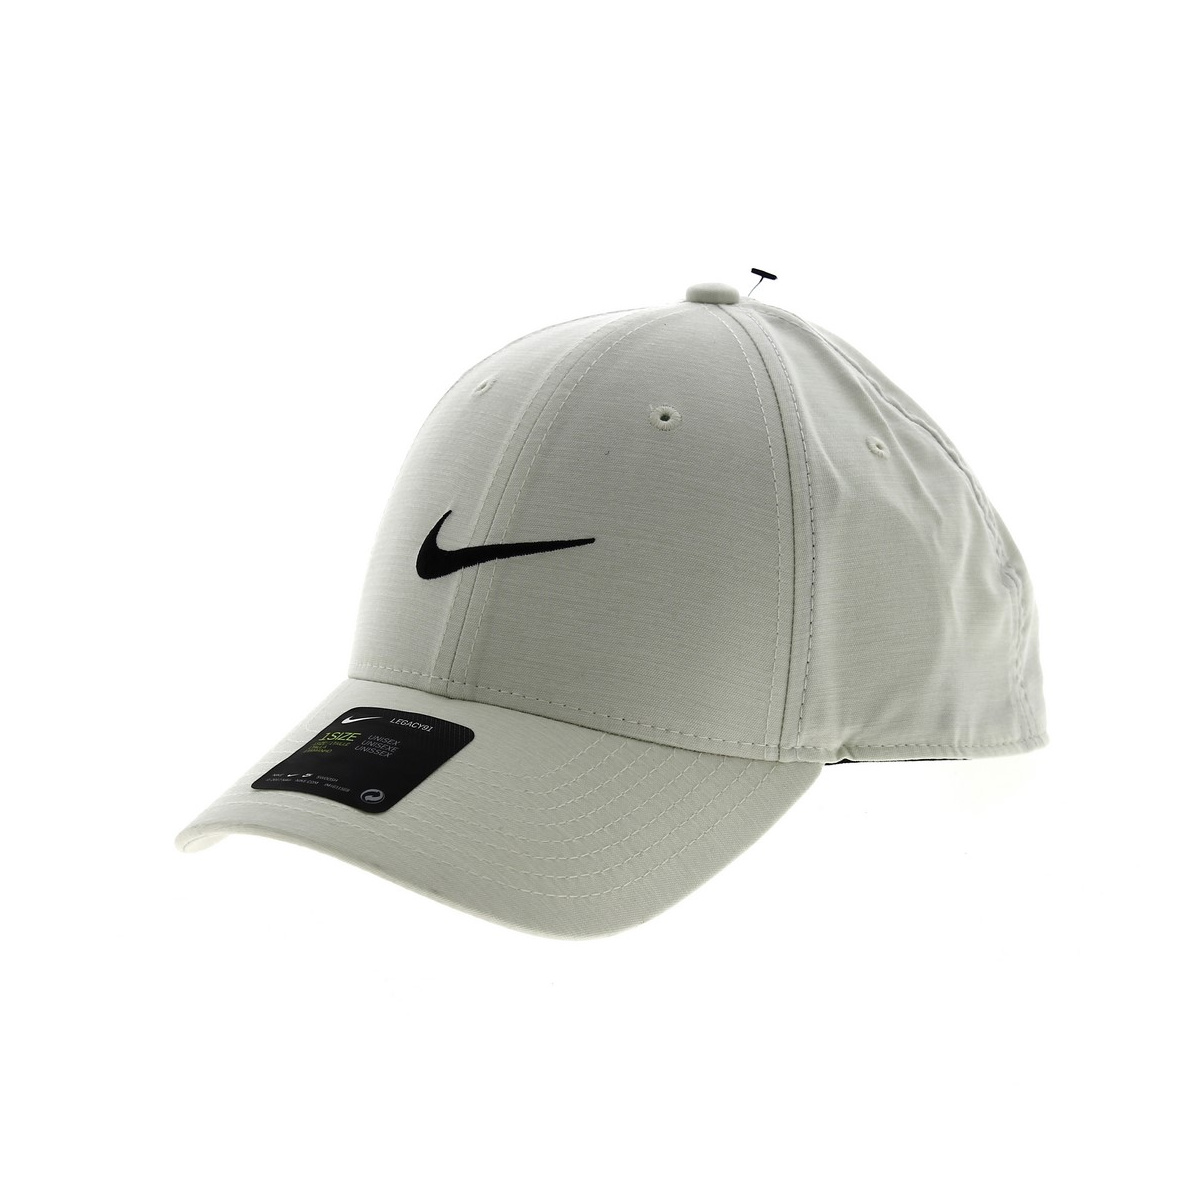 Casquette Baseball Legacy 91 Golf Blanche - Nike Reference : 13105